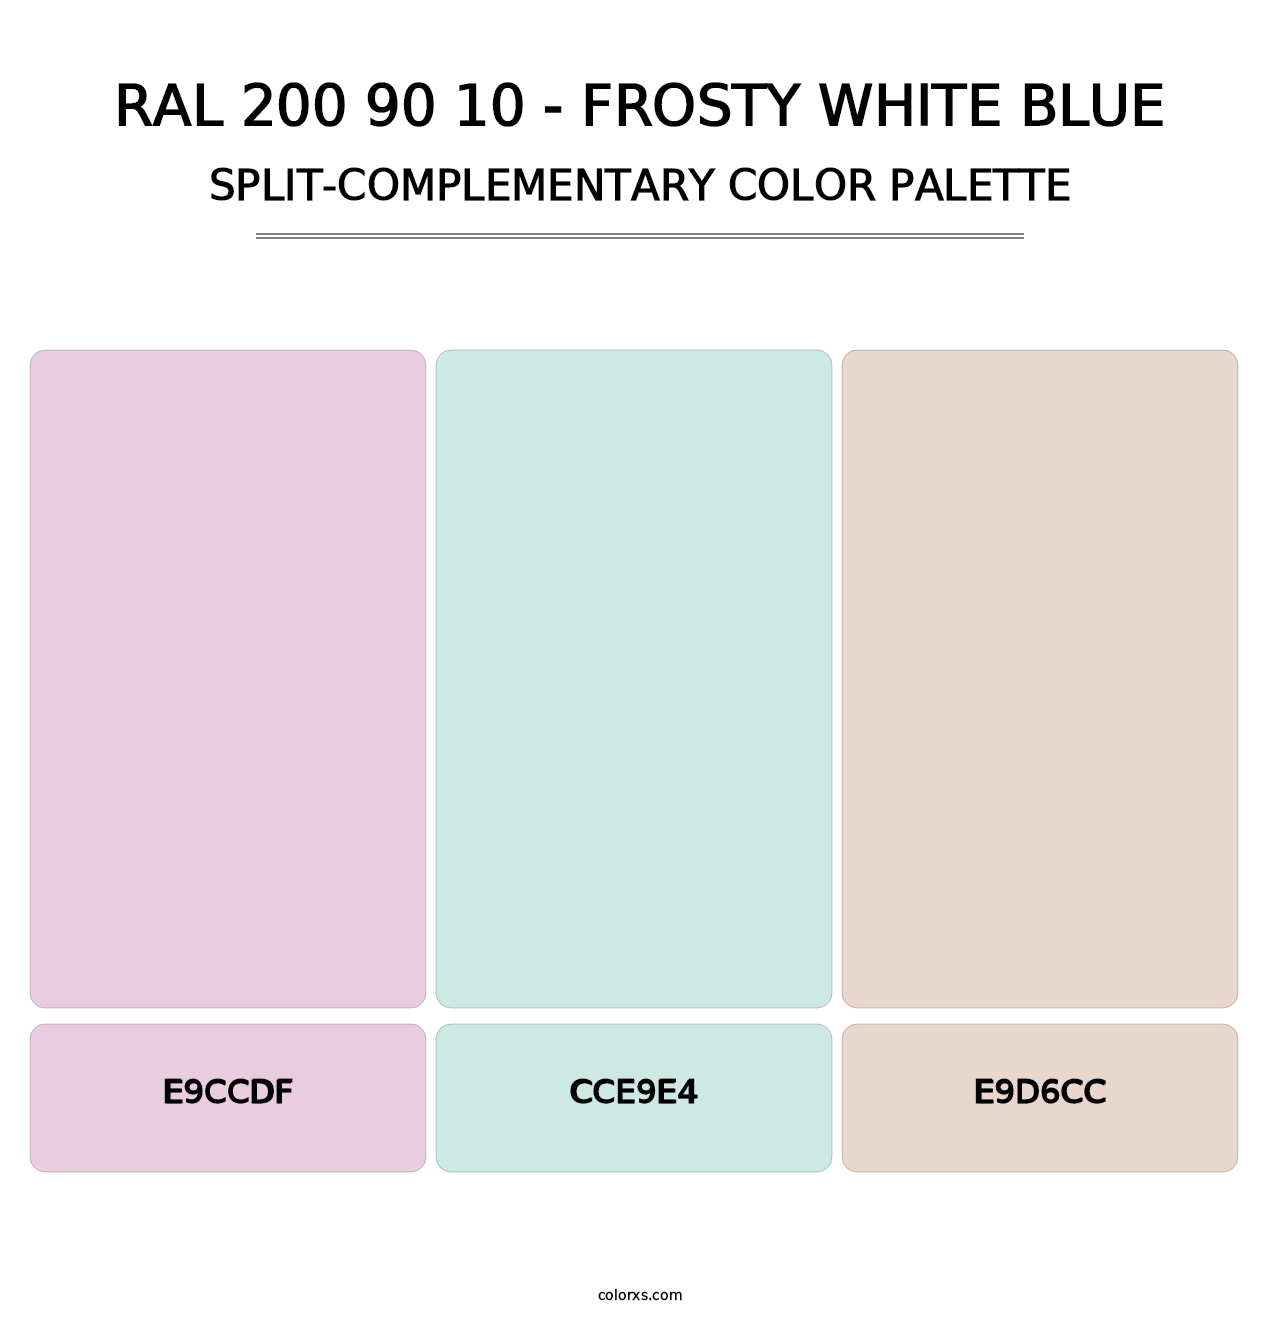 RAL 200 90 10 - Frosty White Blue - Split-Complementary Color Palette